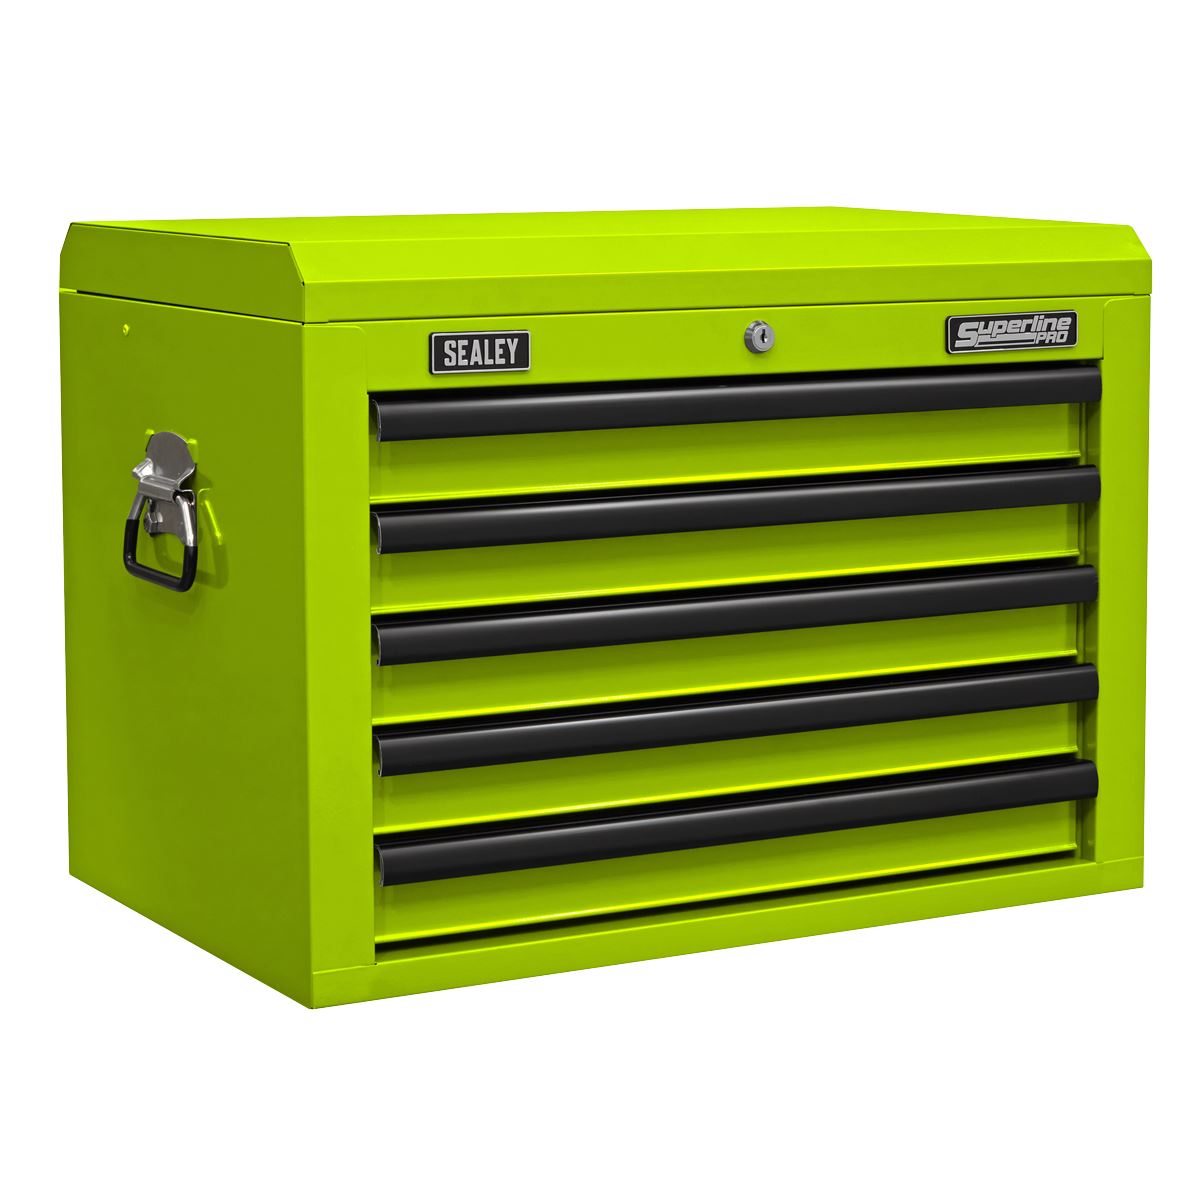 Sealey Superline Pro Topchest 5 Drawer with Ball-Bearing Slides - Green/Black